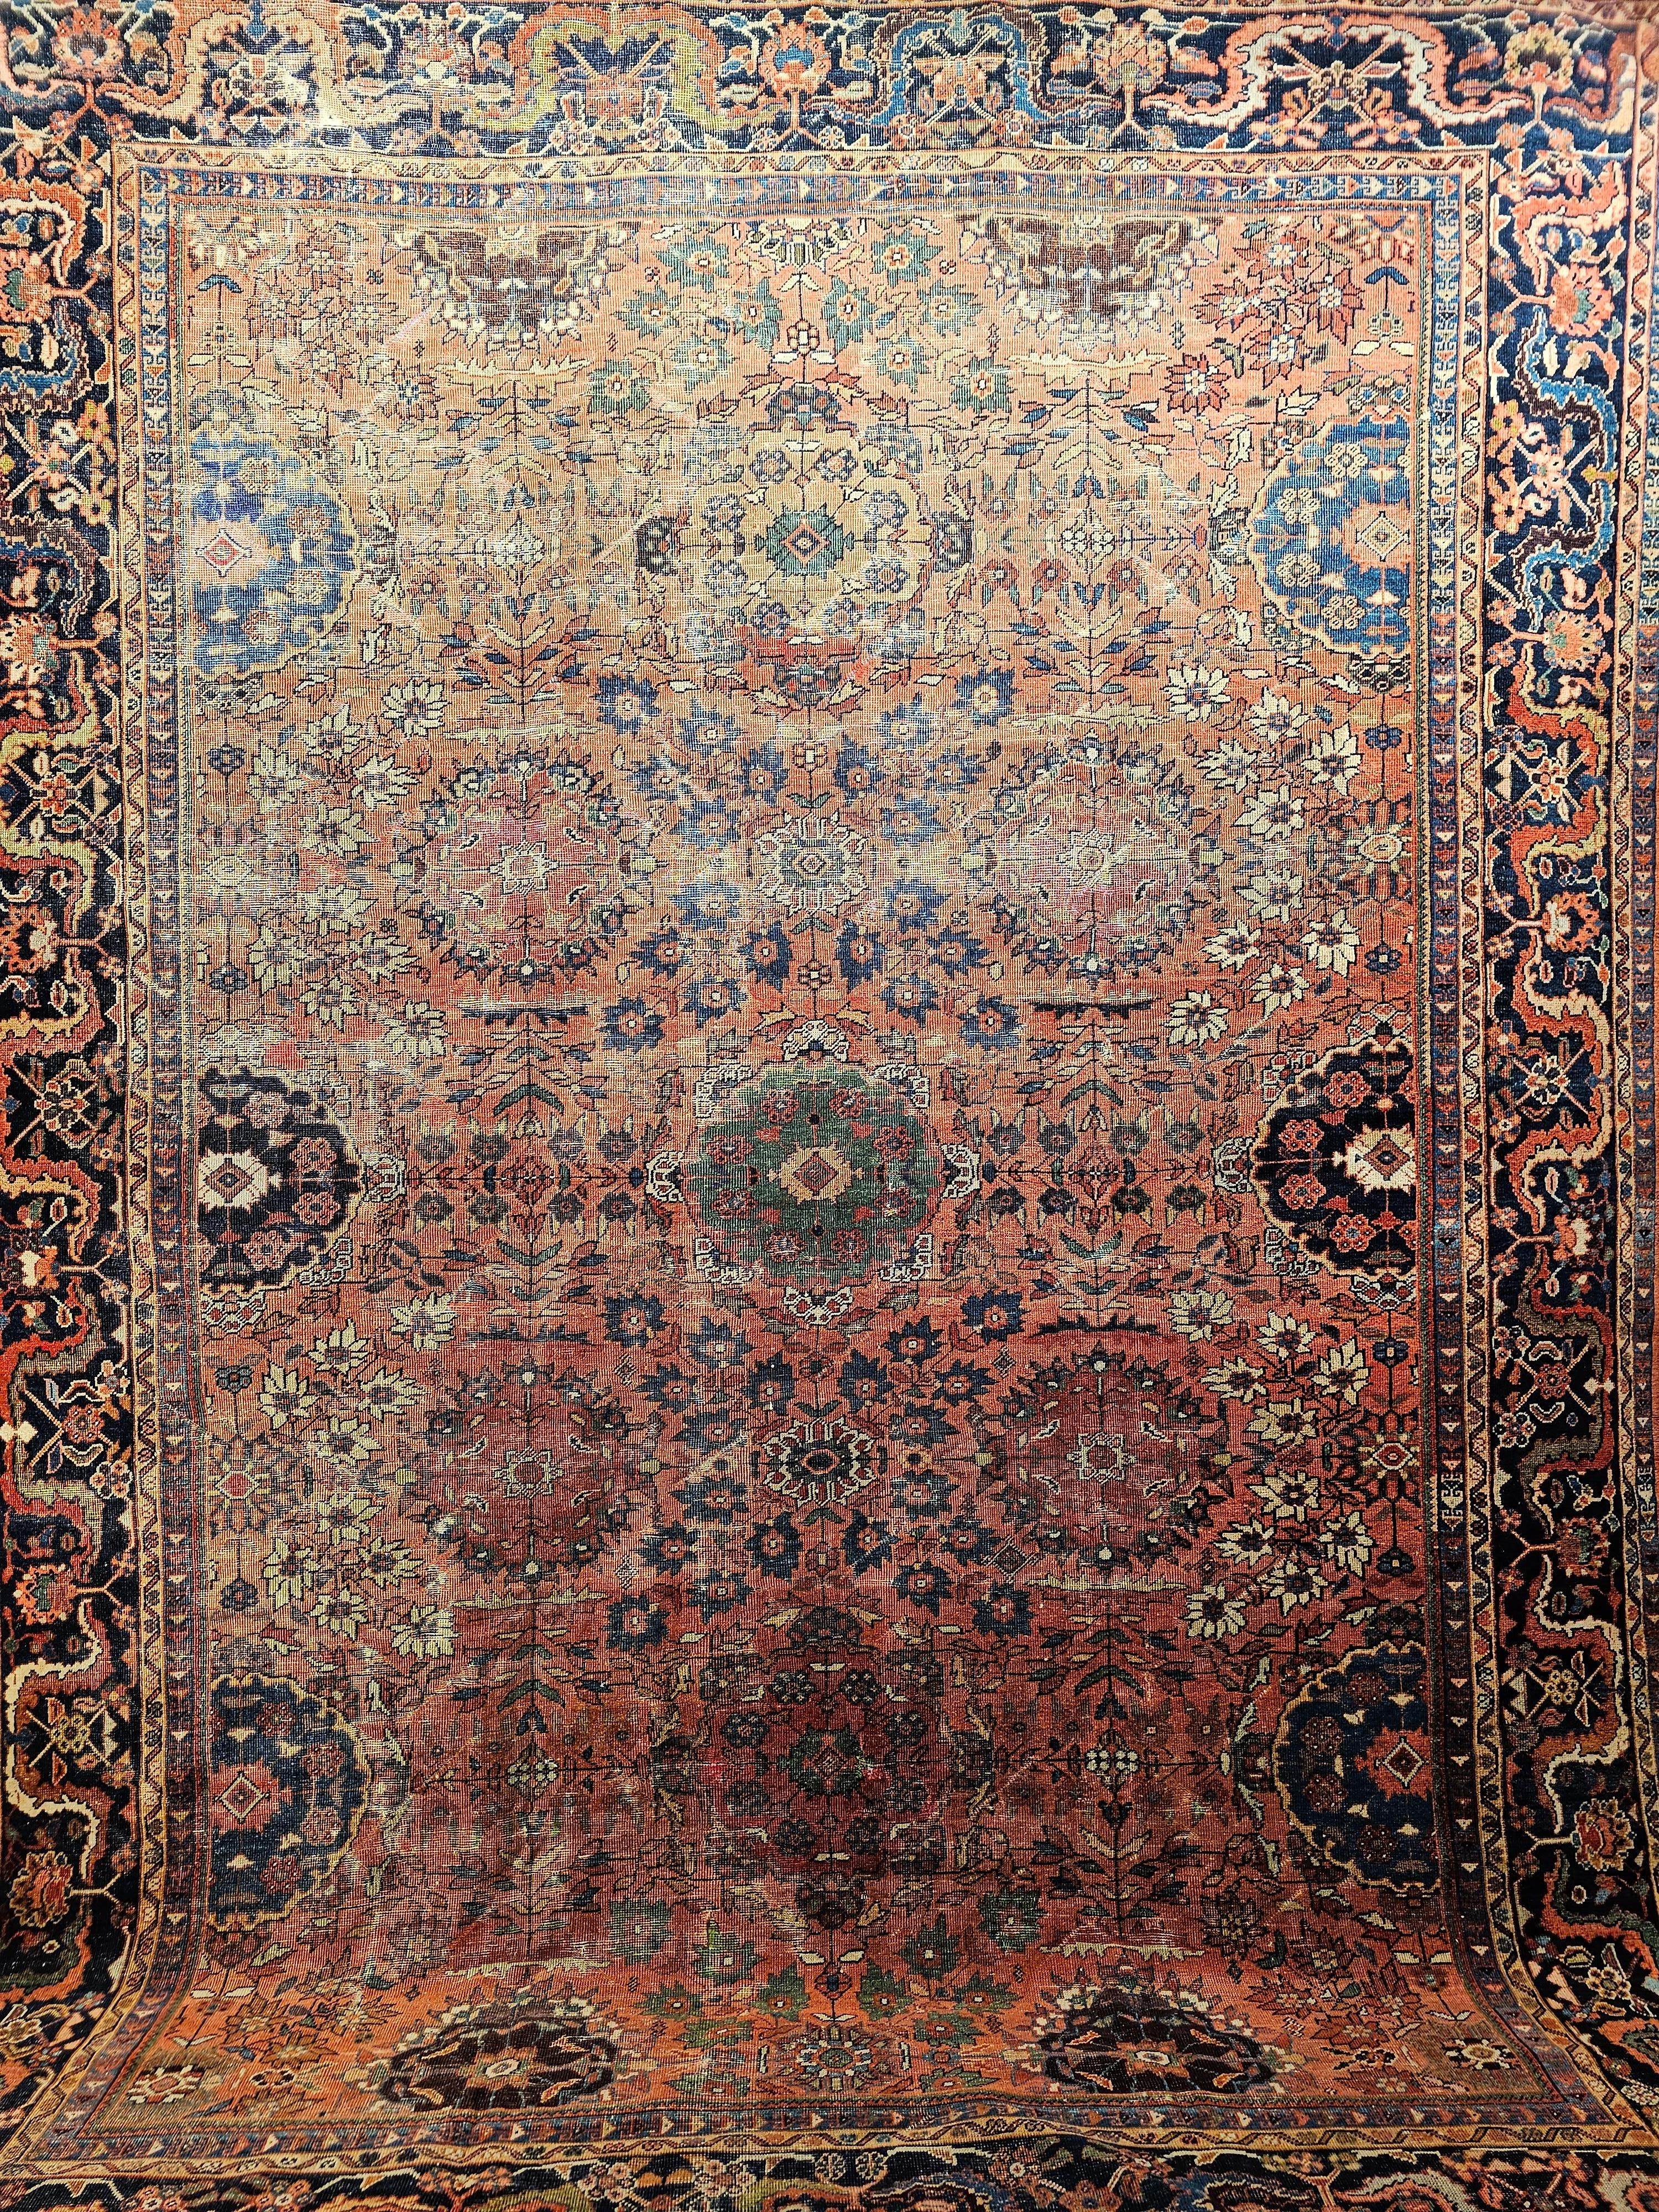 Vintage Persian Mahal Sultanabad Room Size Rug in Brick Red, Navy Blue 13